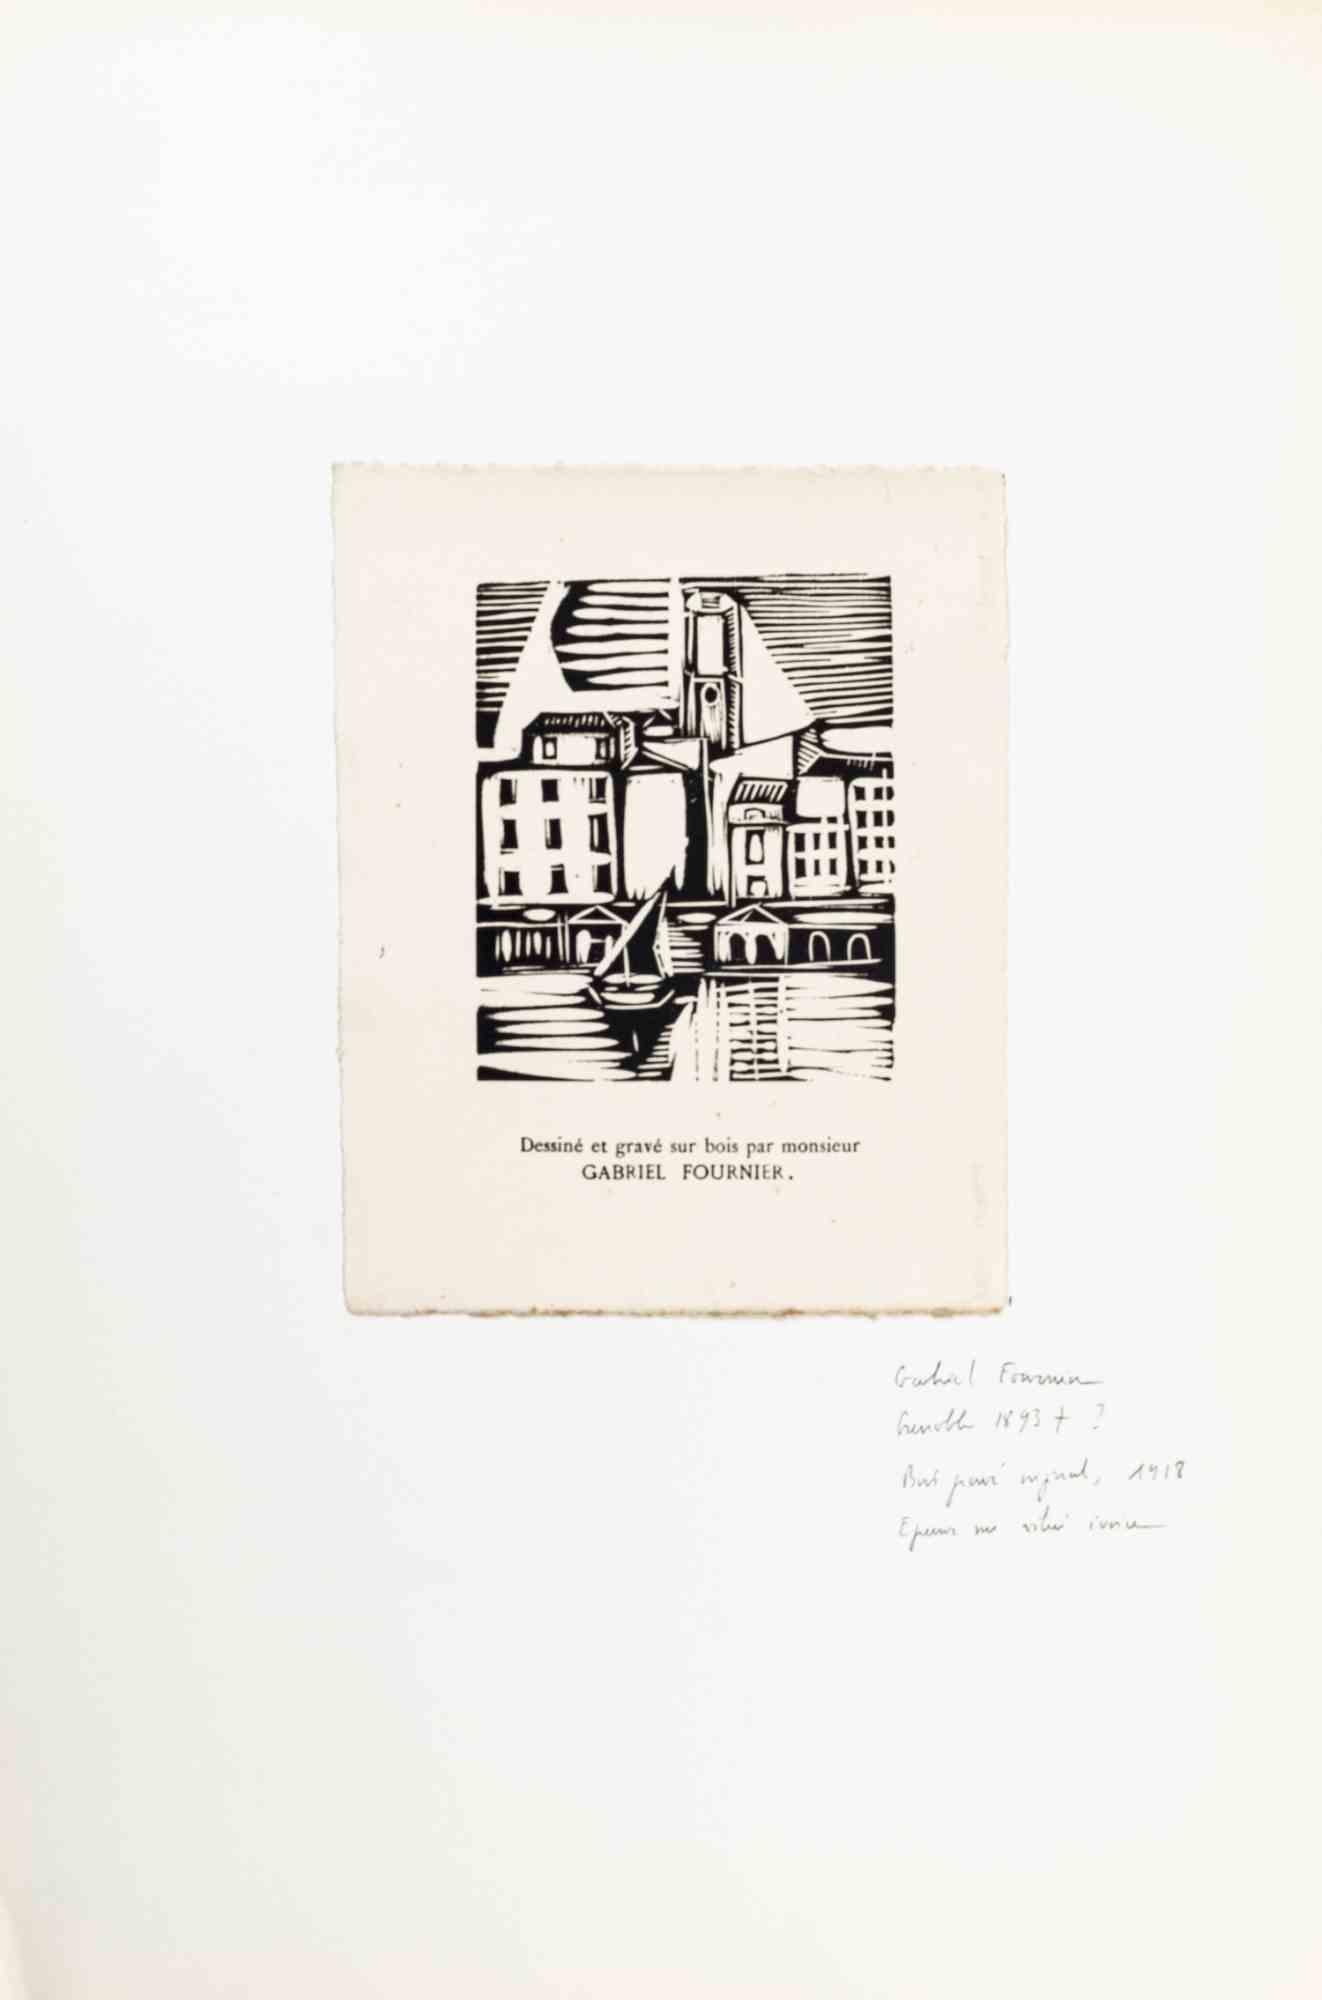 The Cityscape is a woodcut print realized by Gabriel Fournier in the early 20th Century 

Woodcut on paper.

Signed on the plate, applied on a Passepartout:49 x 32 cm

The artwork is realized through strong deft strokes in a beautiful composition.